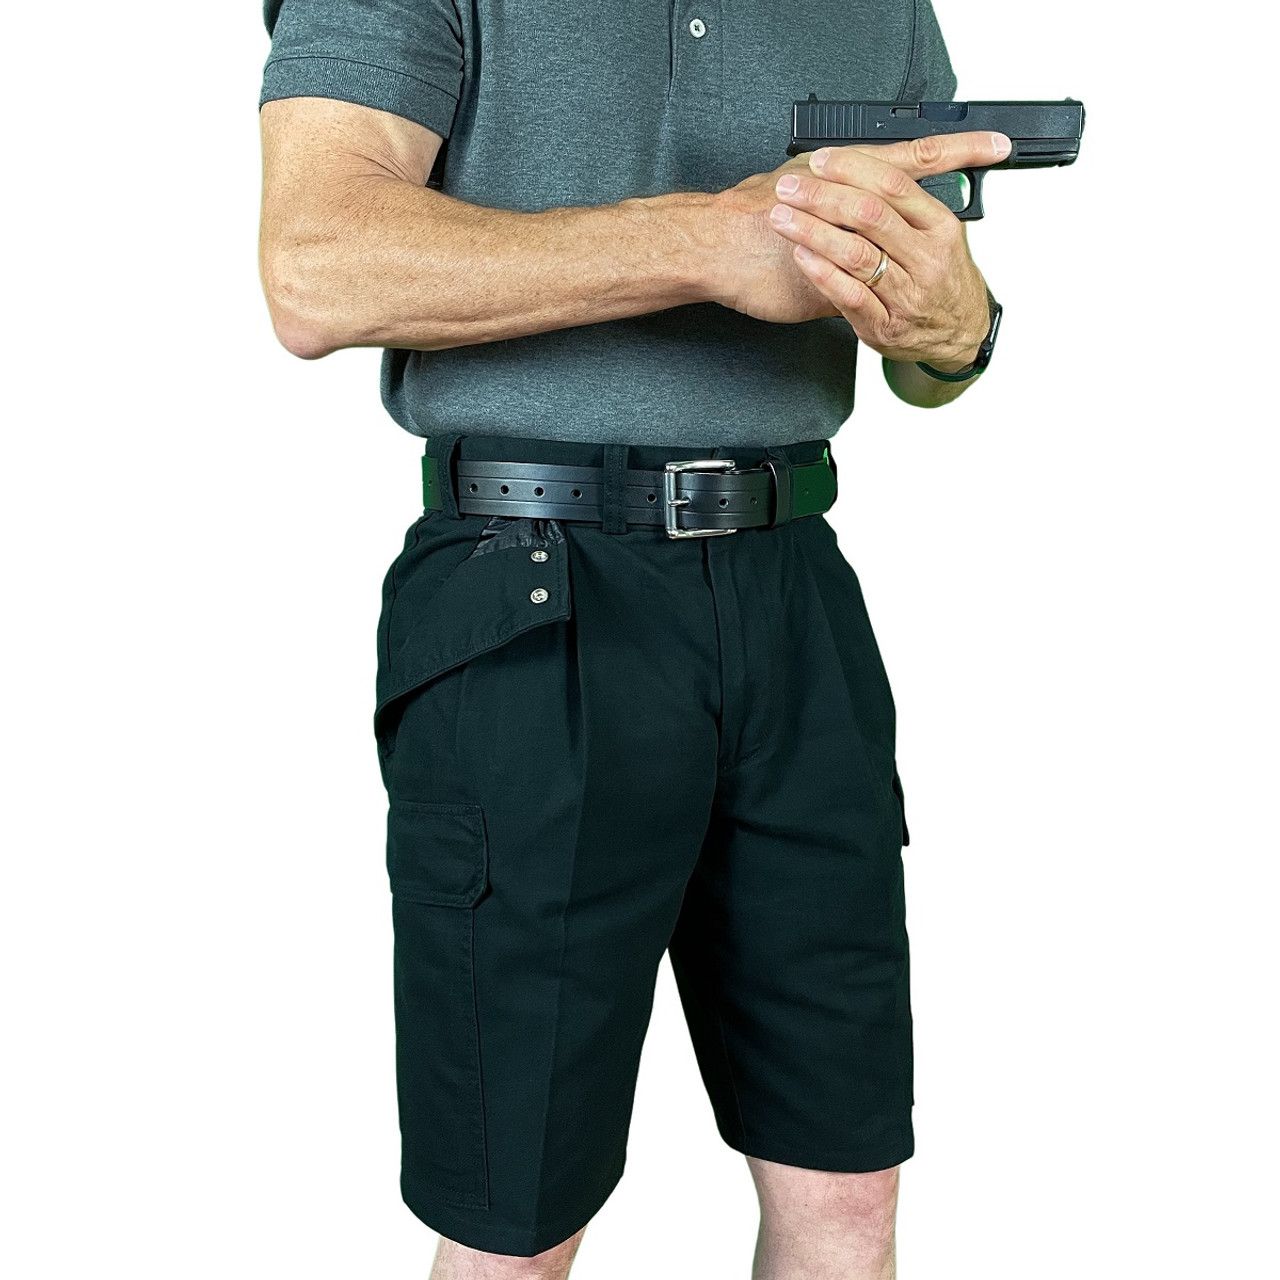 Black Concealed Carry Cargo Shorts